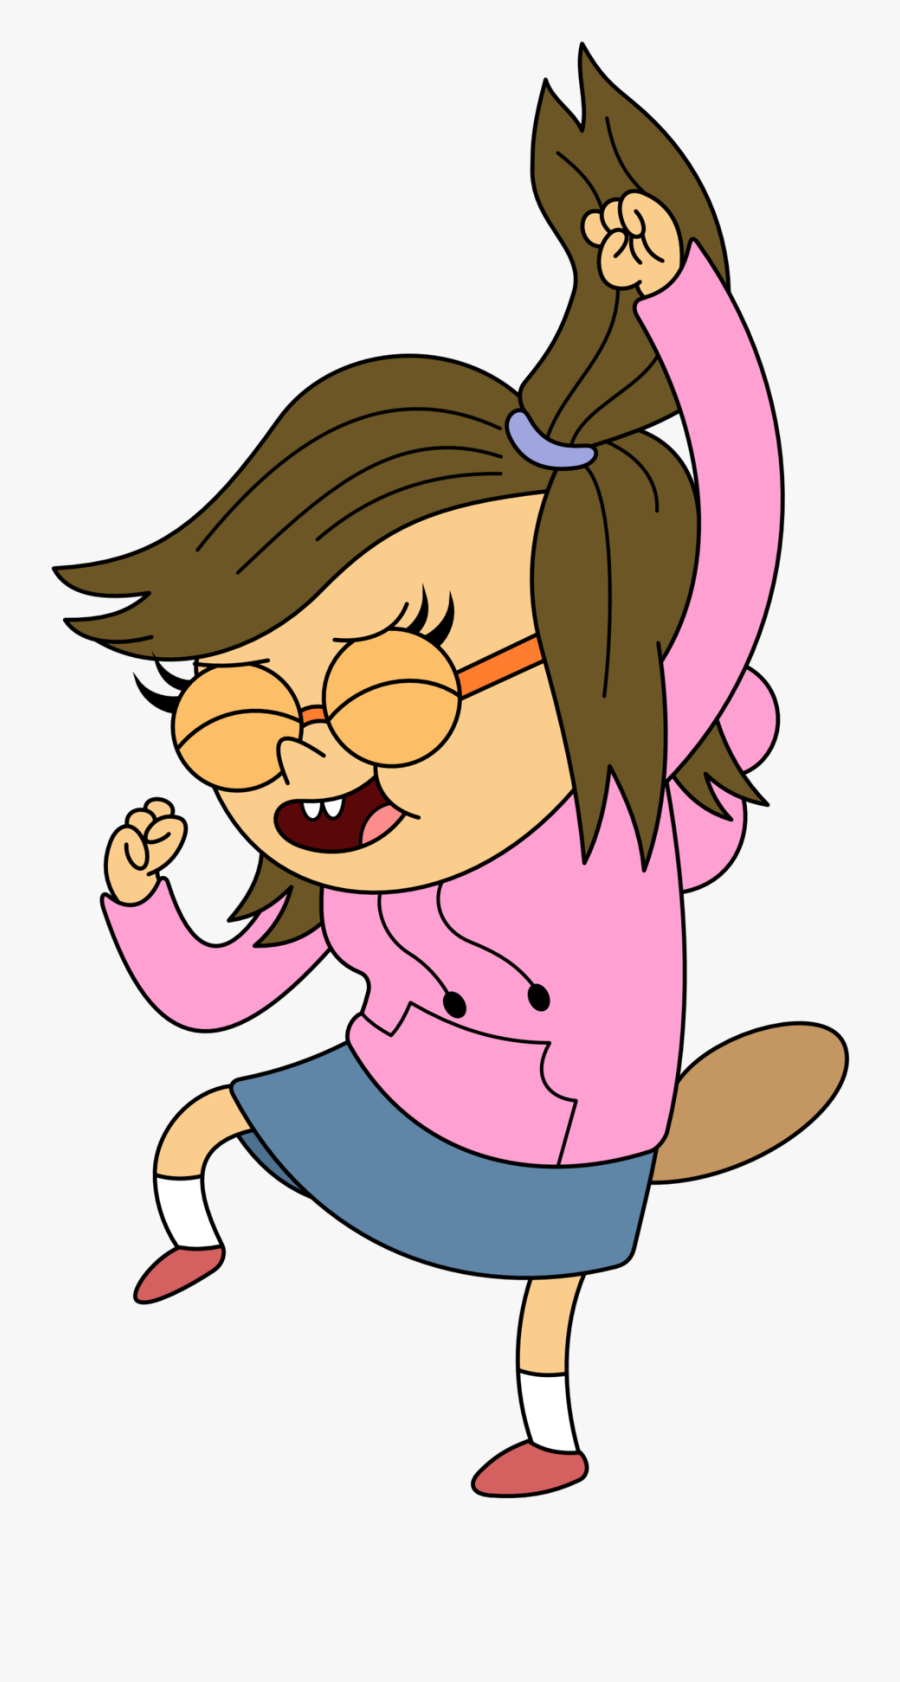 Well Yeah, She"s A Mole, Transparent Clipart